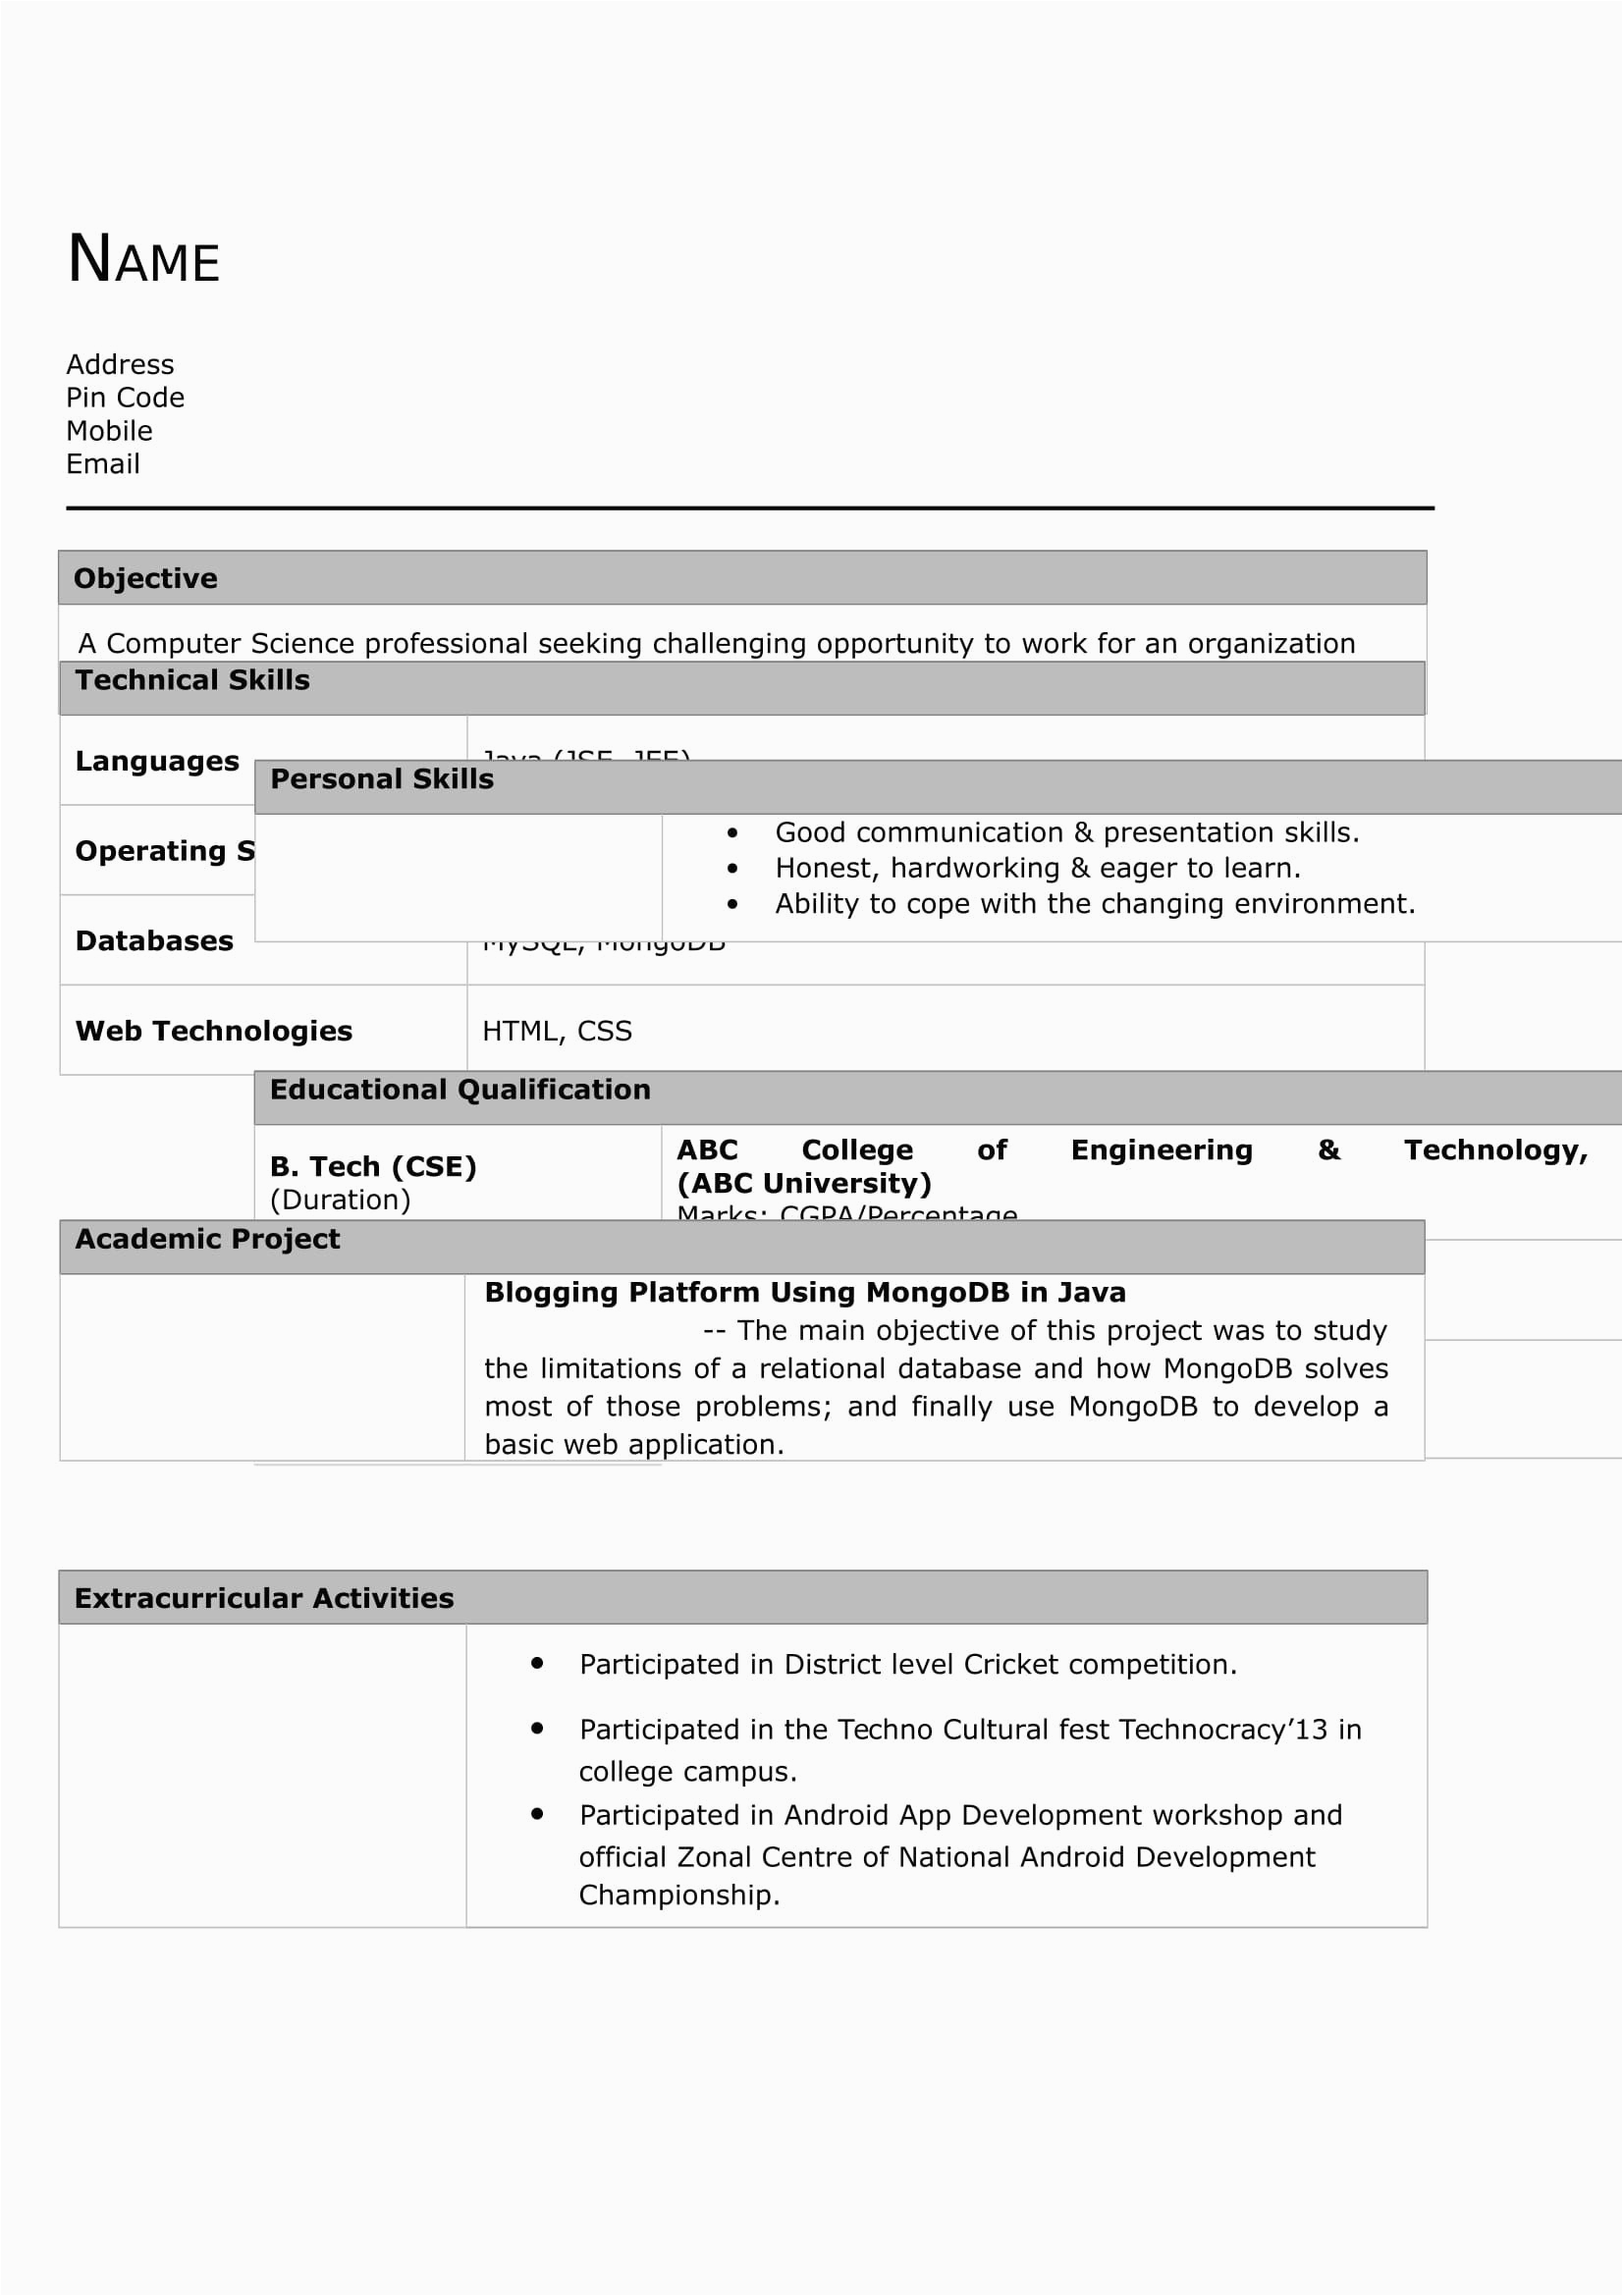 Resume Template for Mechanical Engineer Fresher Resume for Mechanical Engineer Fresher In Word format